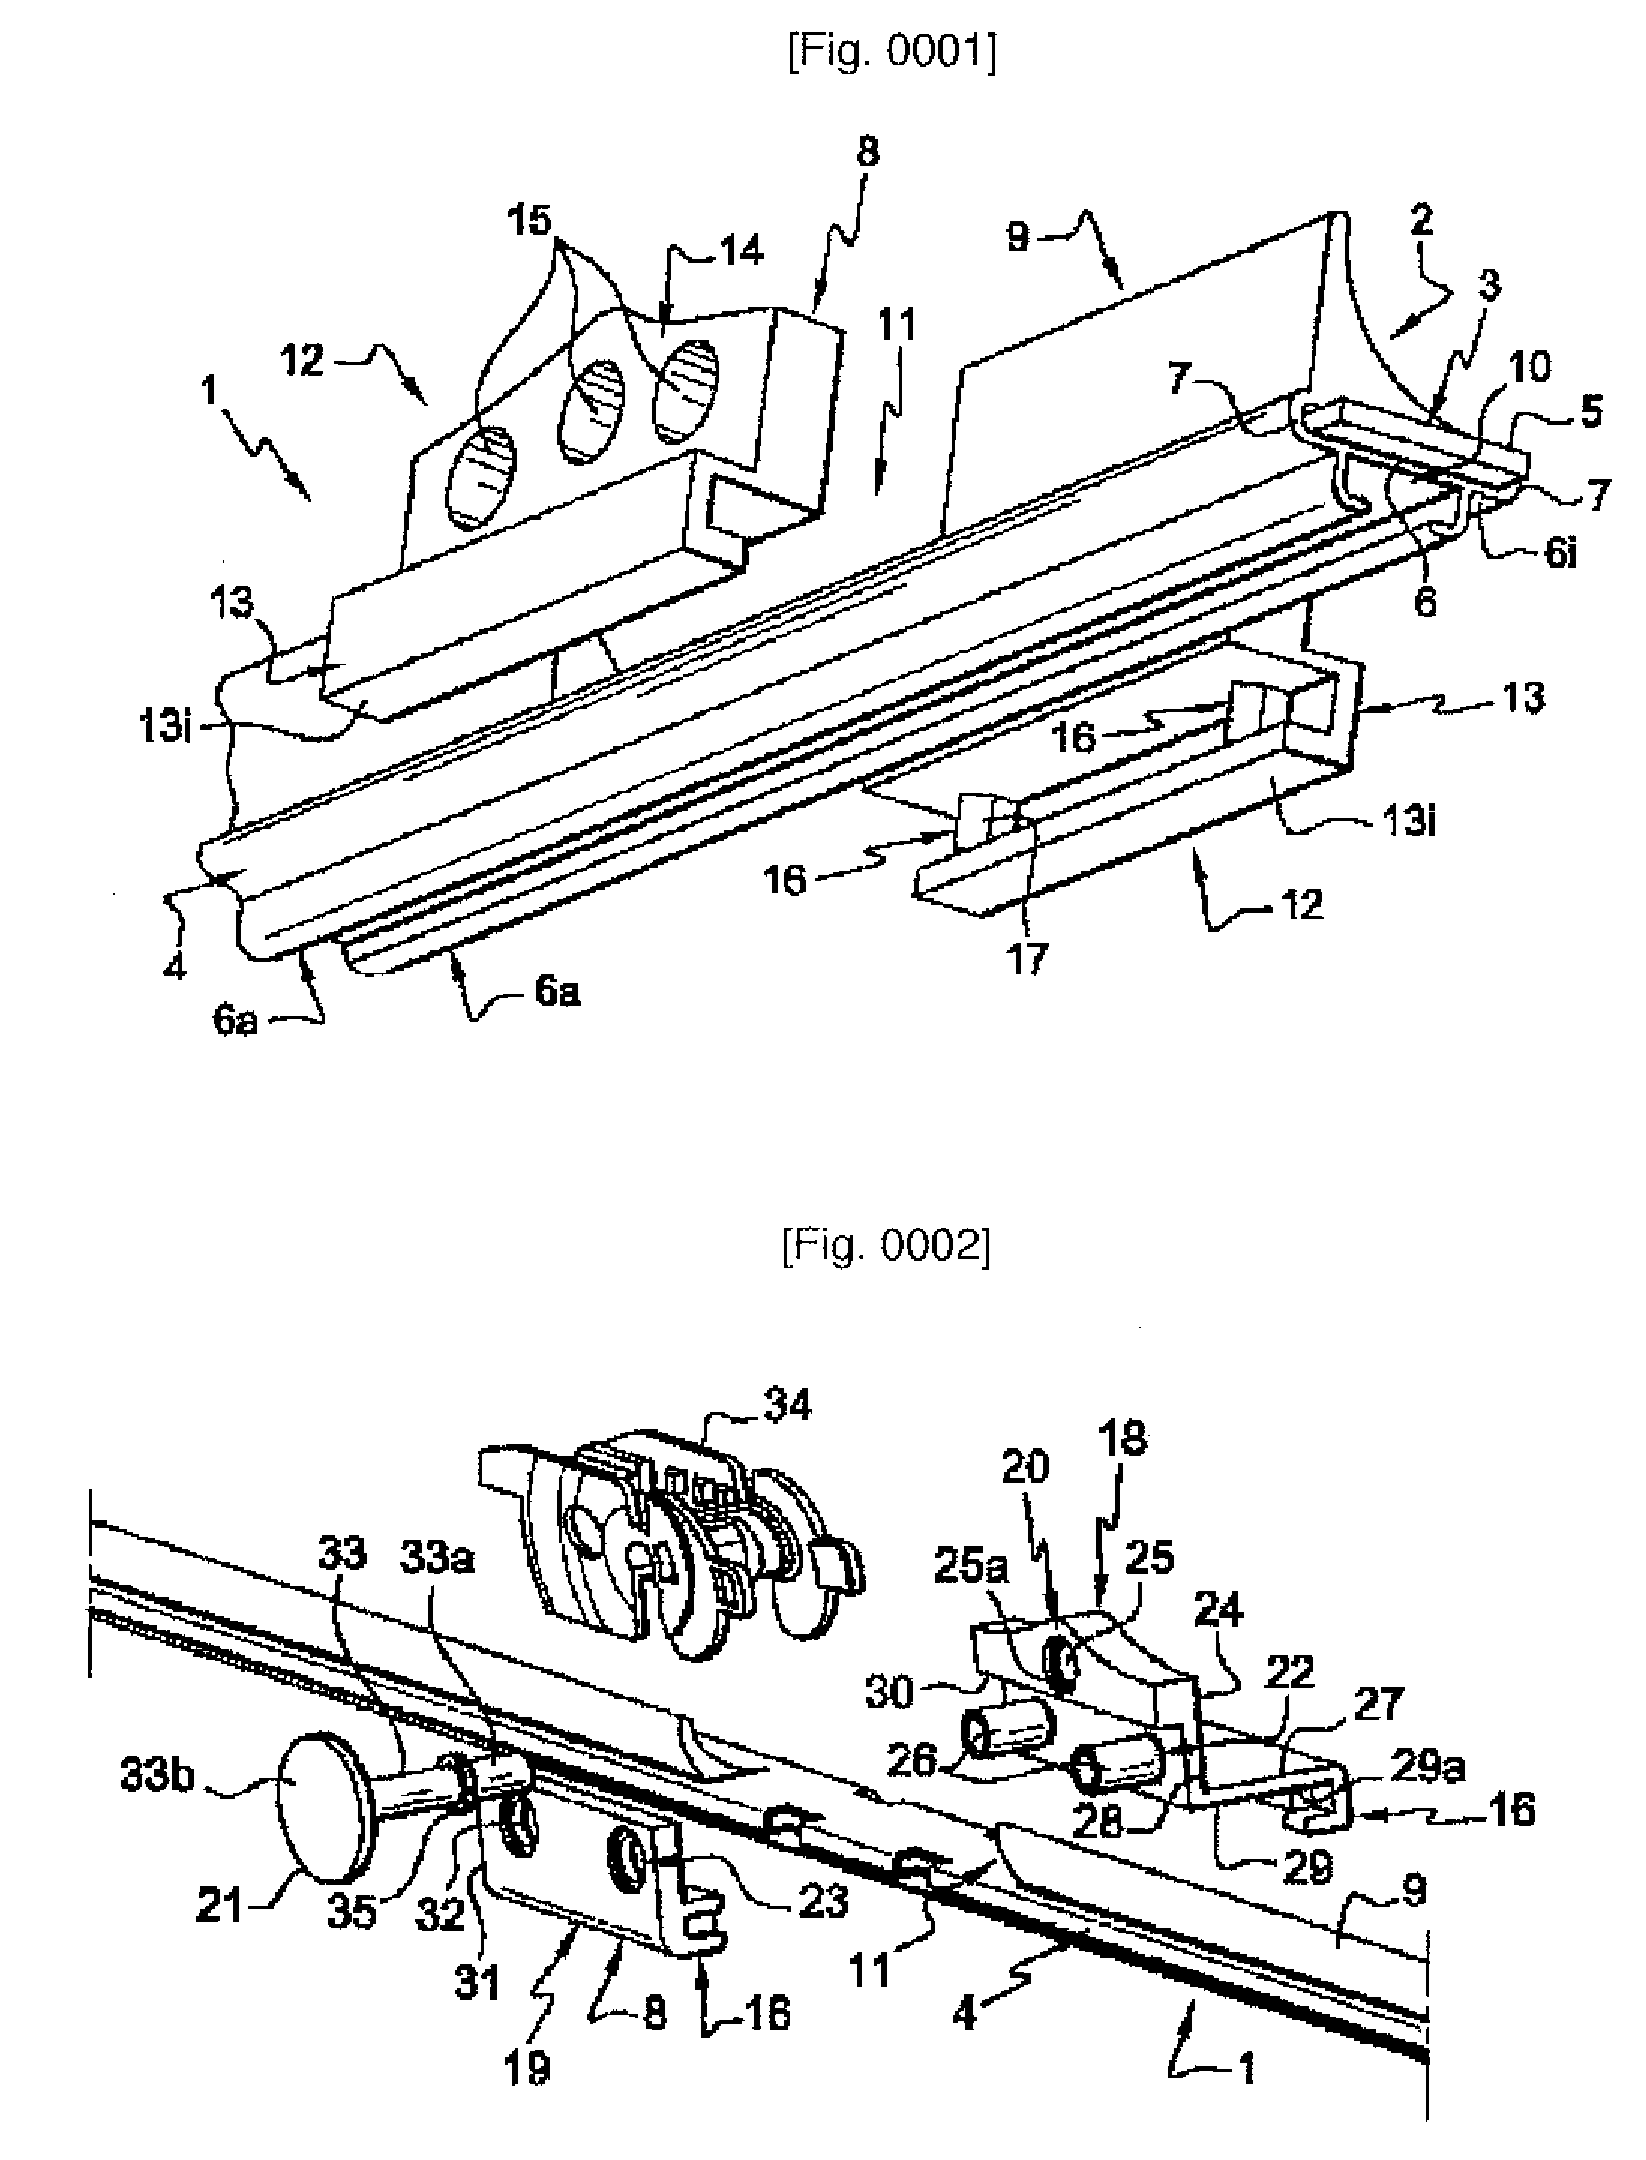 Connector Connecting a Windscreen-Wiper Blade to a Drive Arm